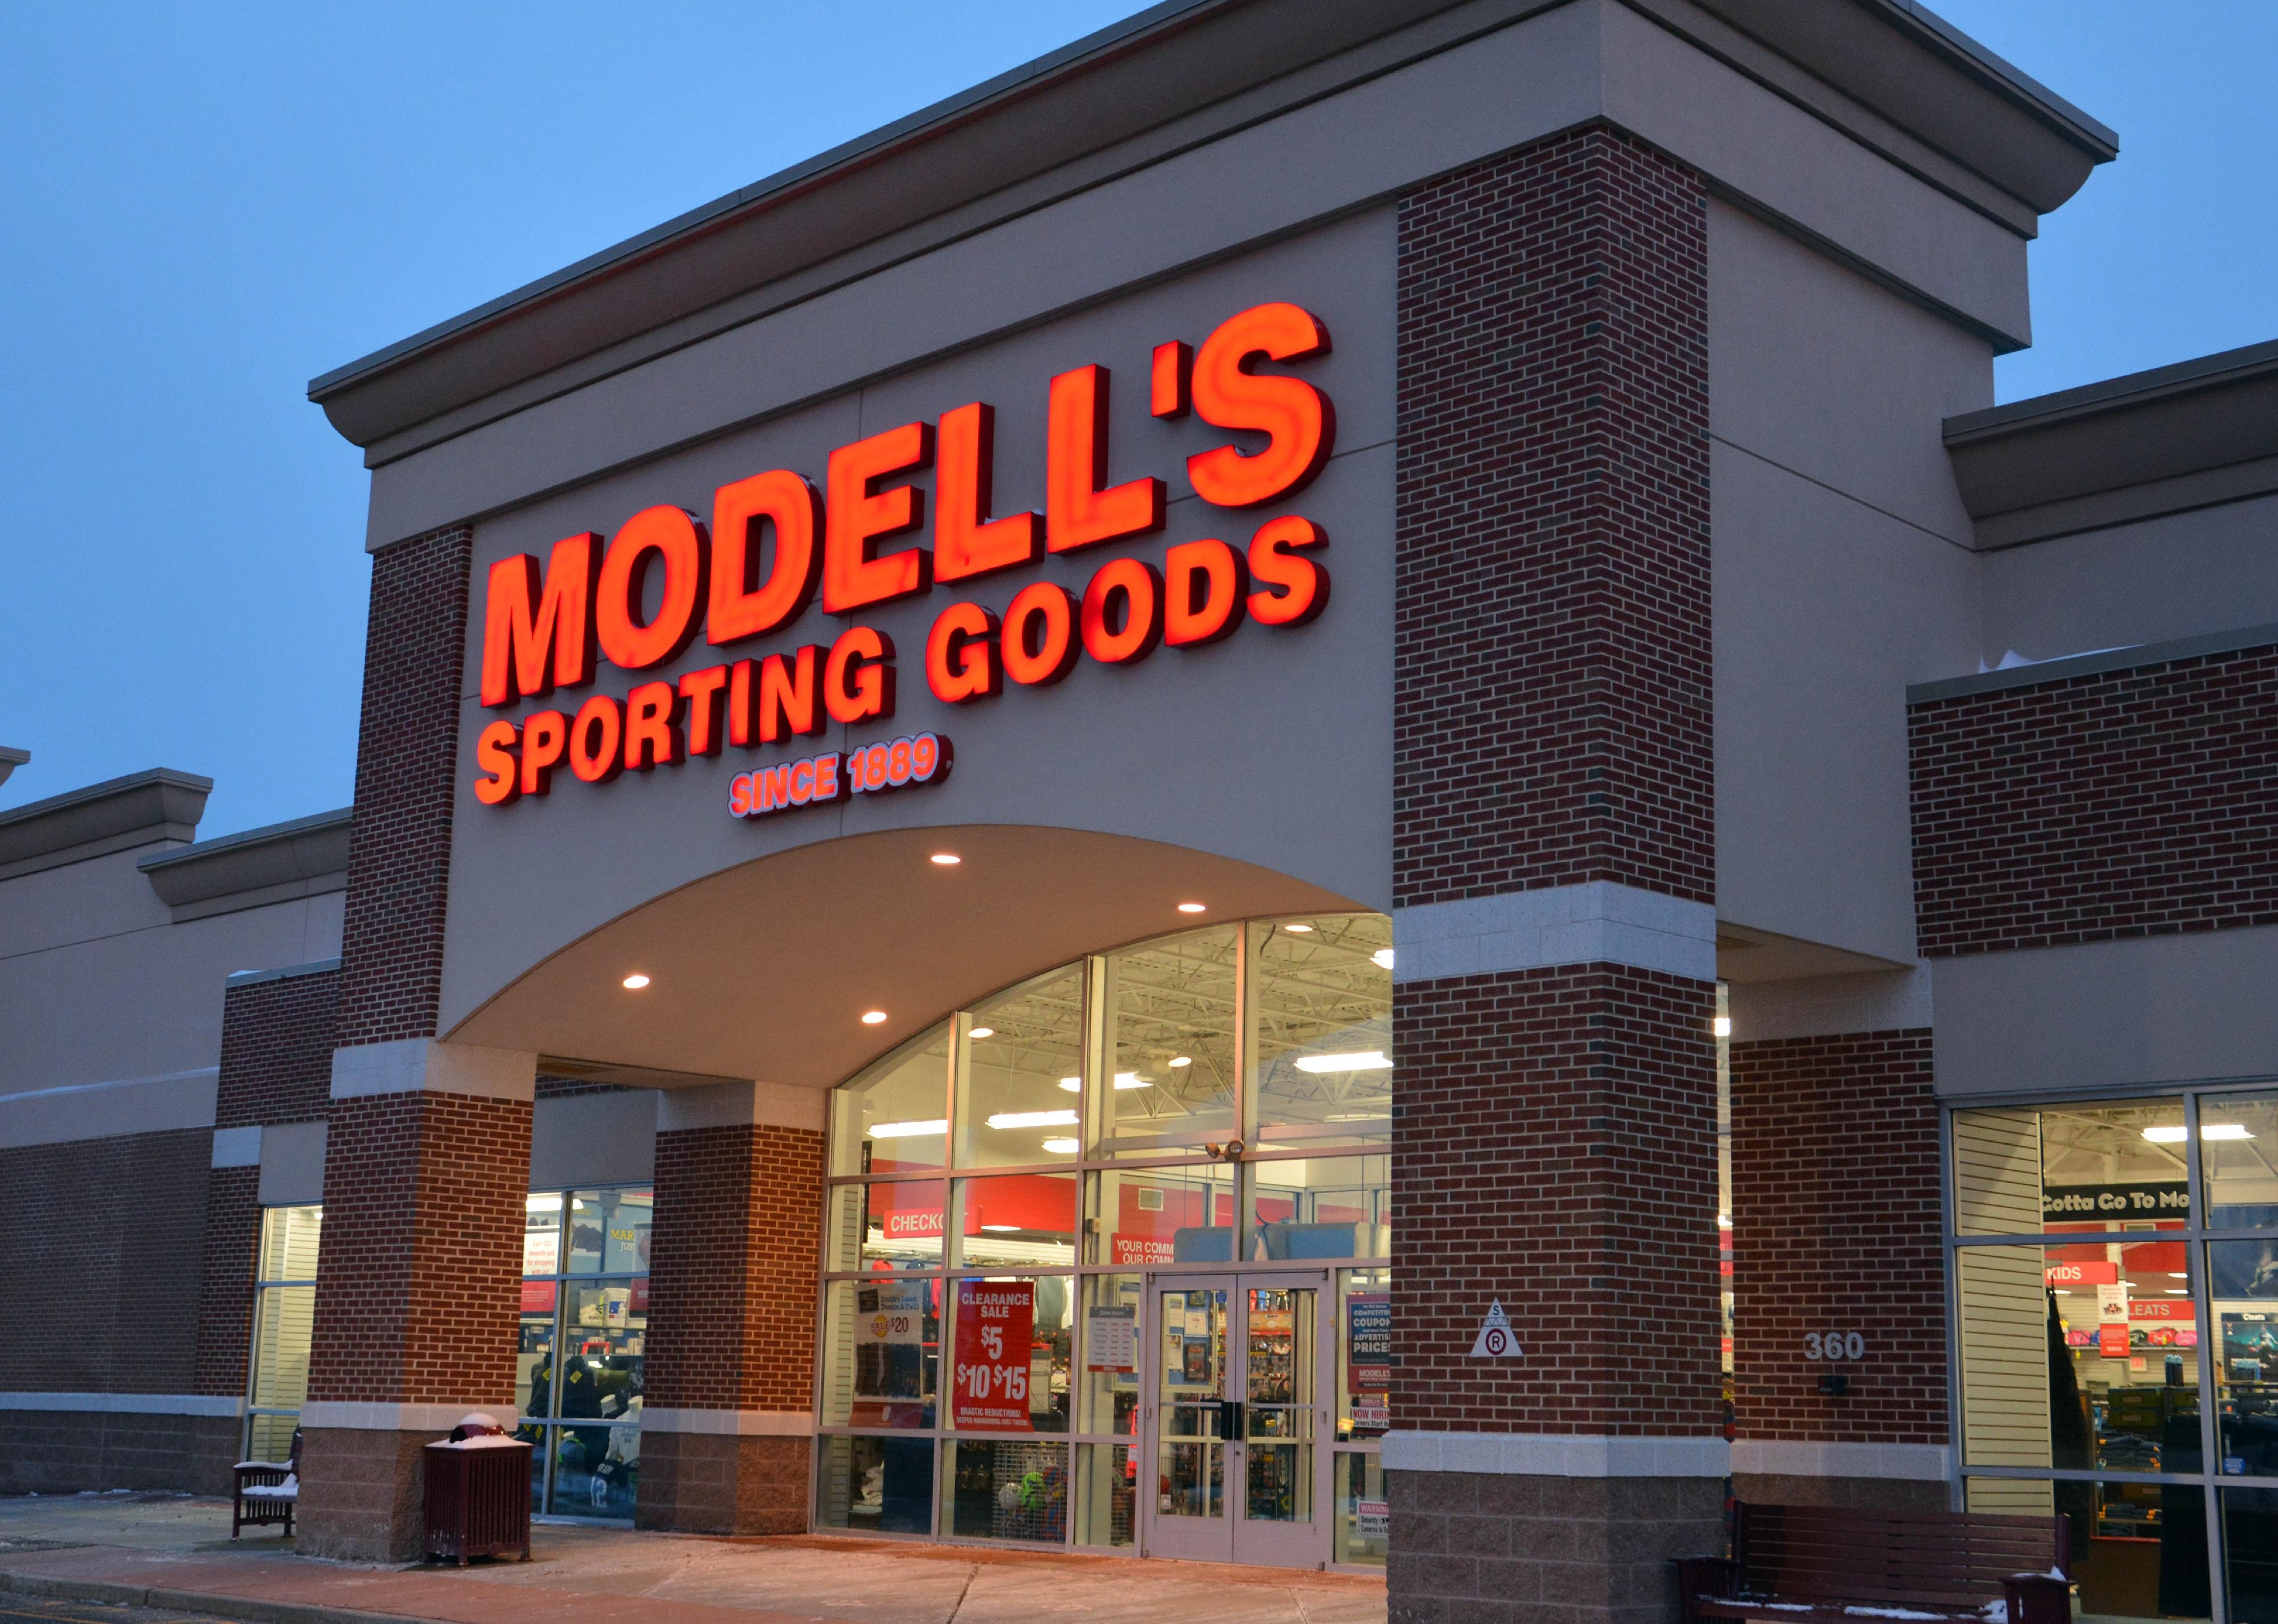 The brick exterior of a Modell's Sporting Goods store.